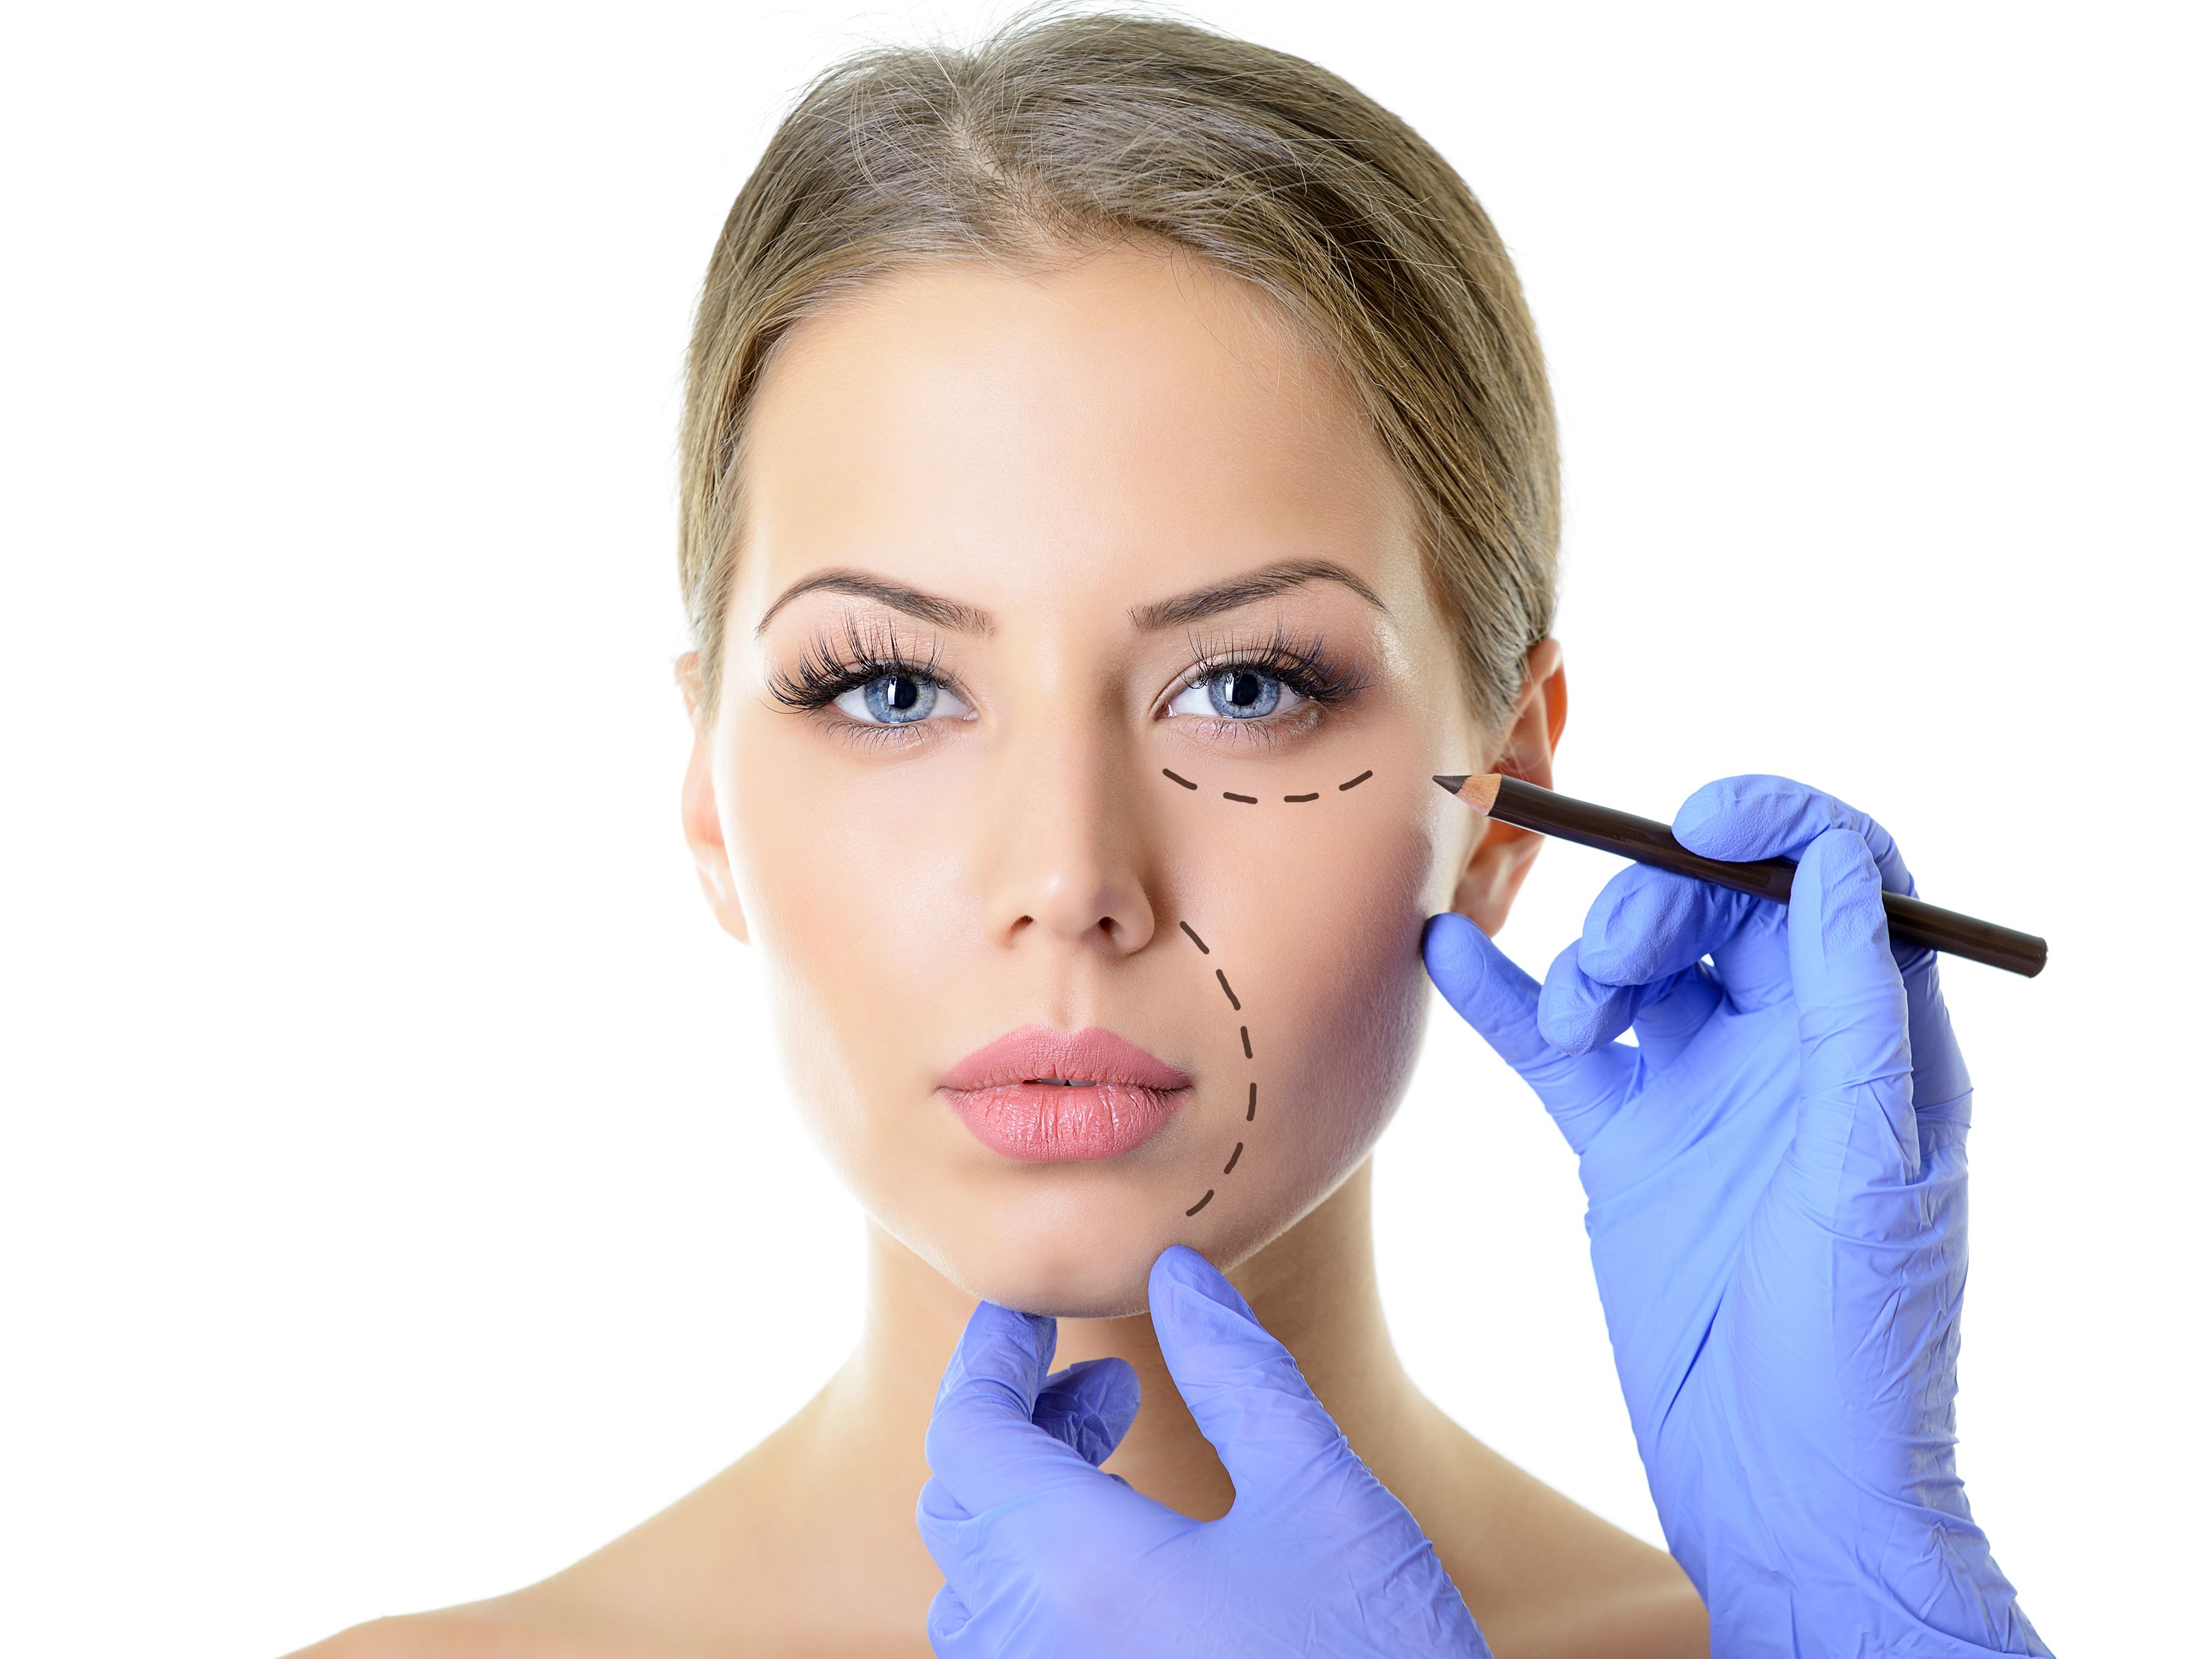 Why The Patient’s Interest In Plastic Surgery Is Increasing- Answers Alton Ingram MD